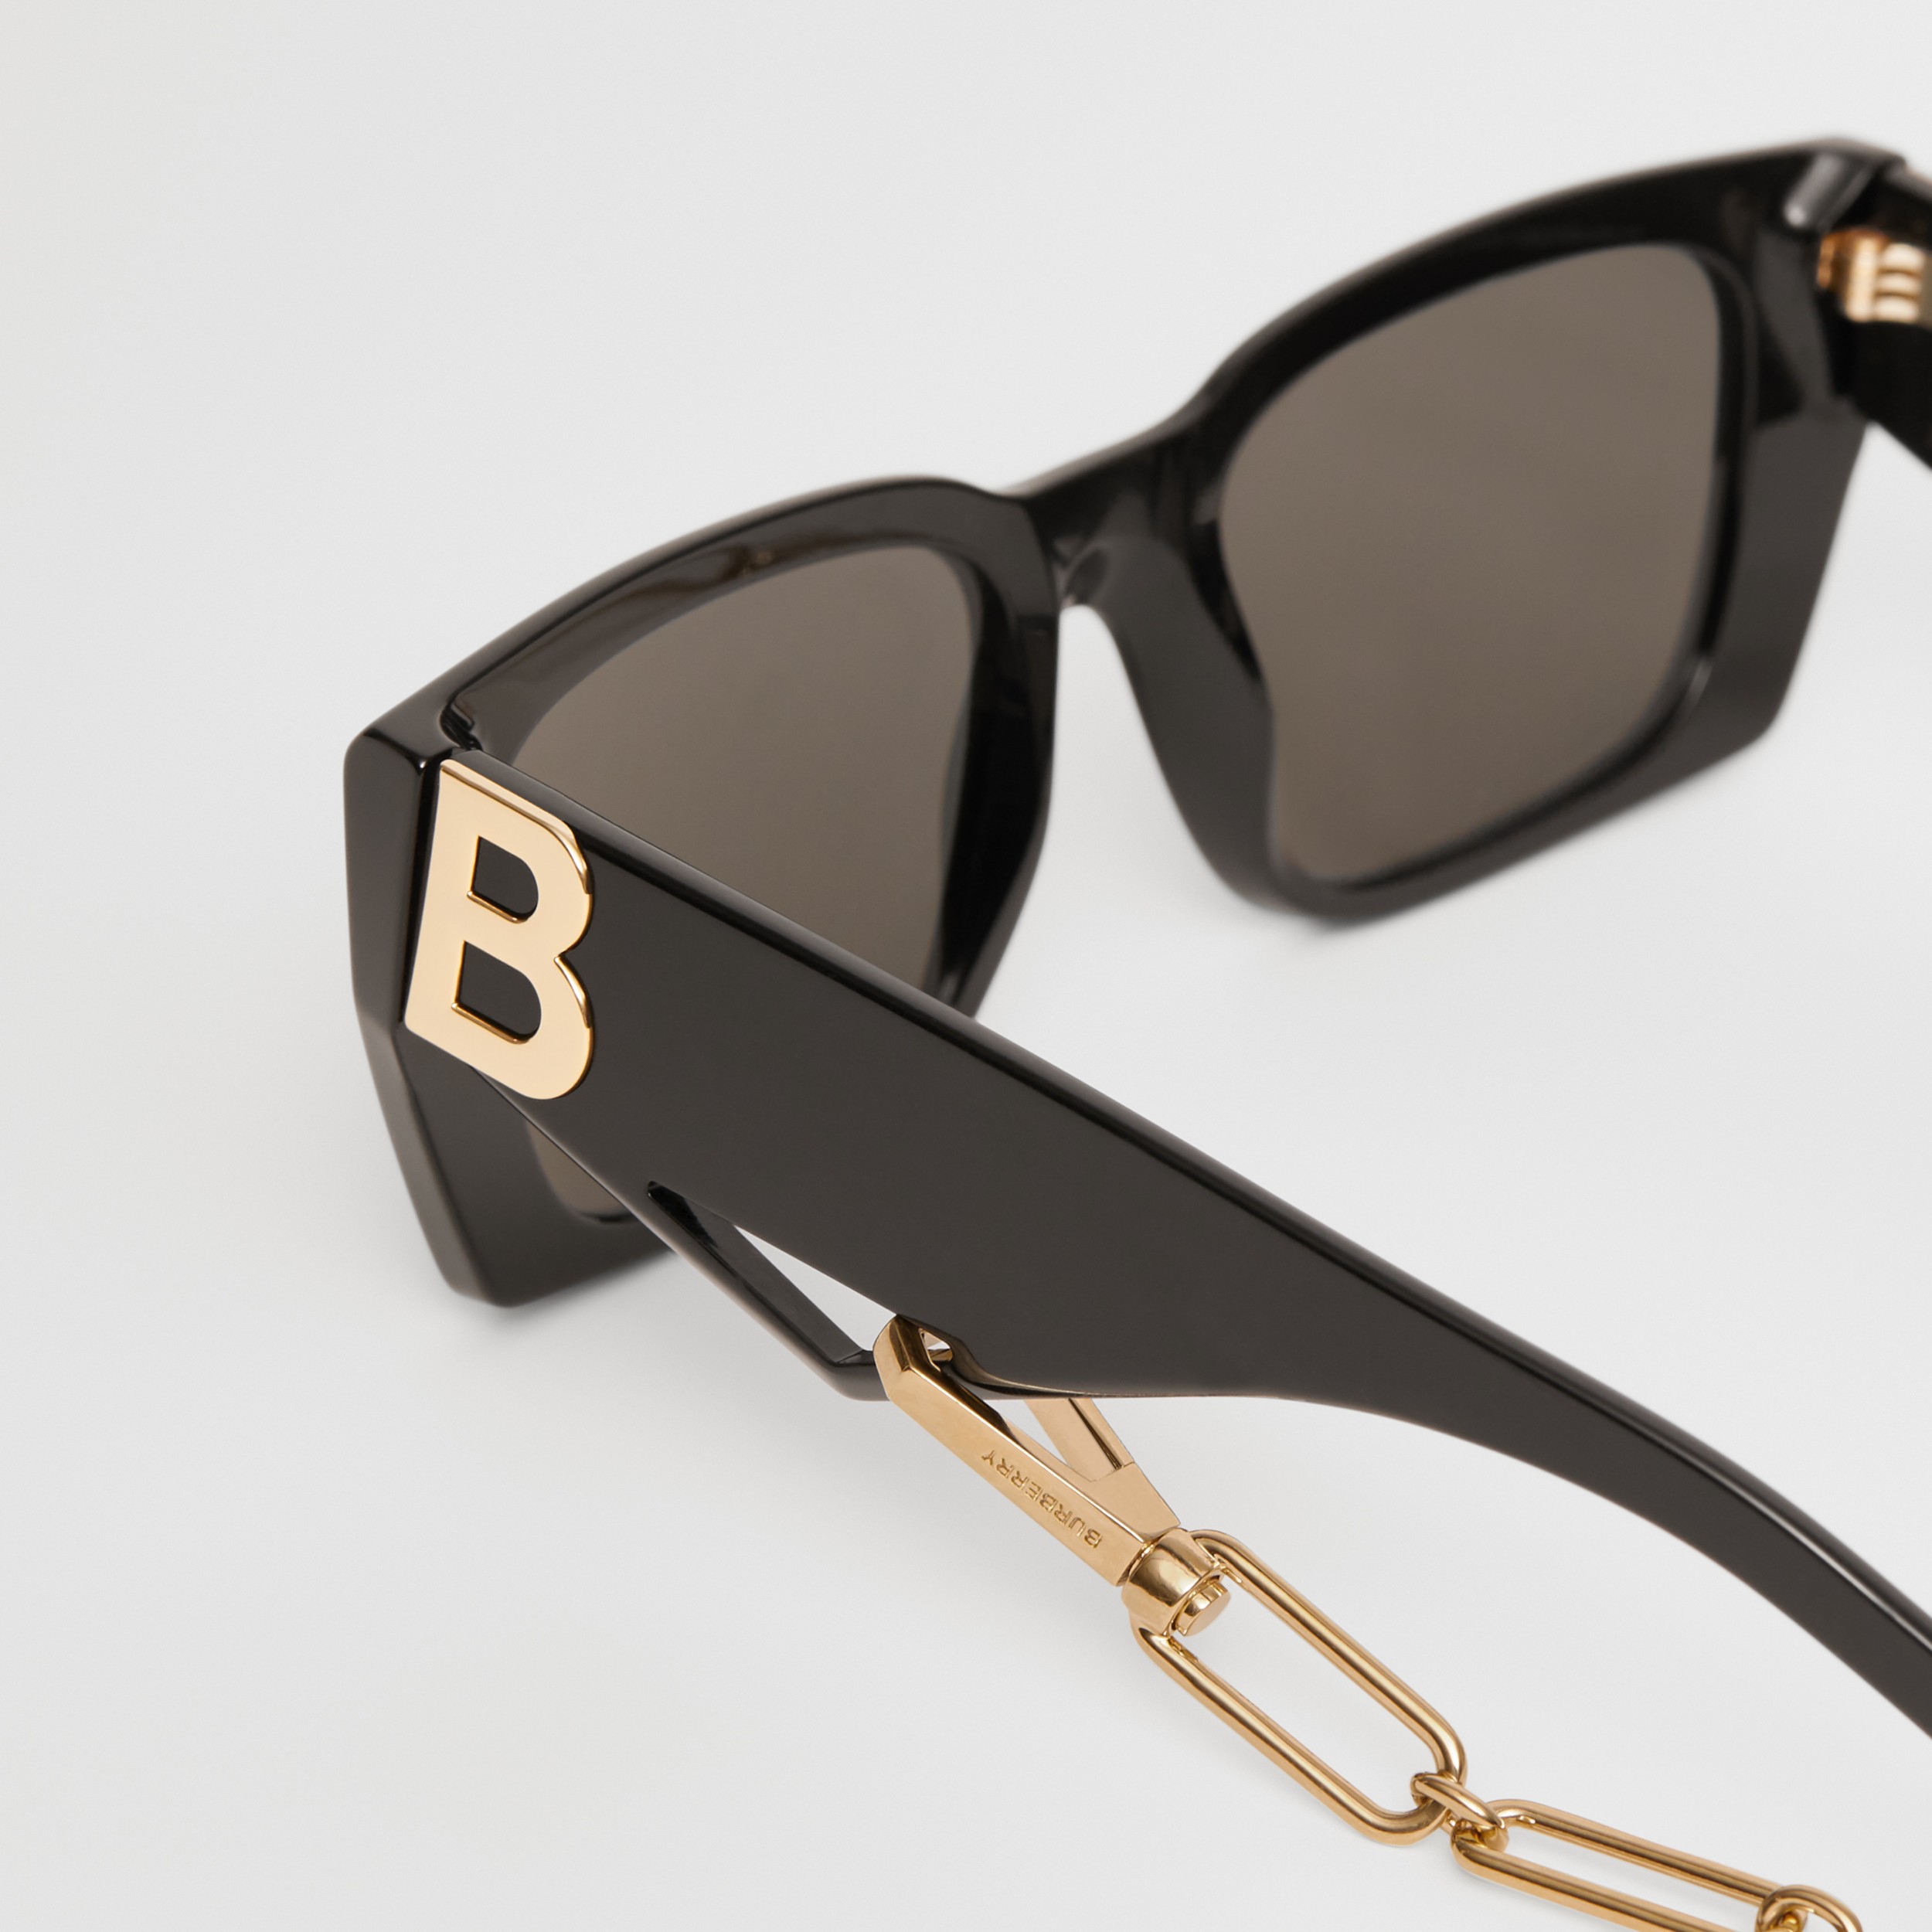 B Motif Rectangular Sunglasses with Chain in Black - Women | Burberry® Official